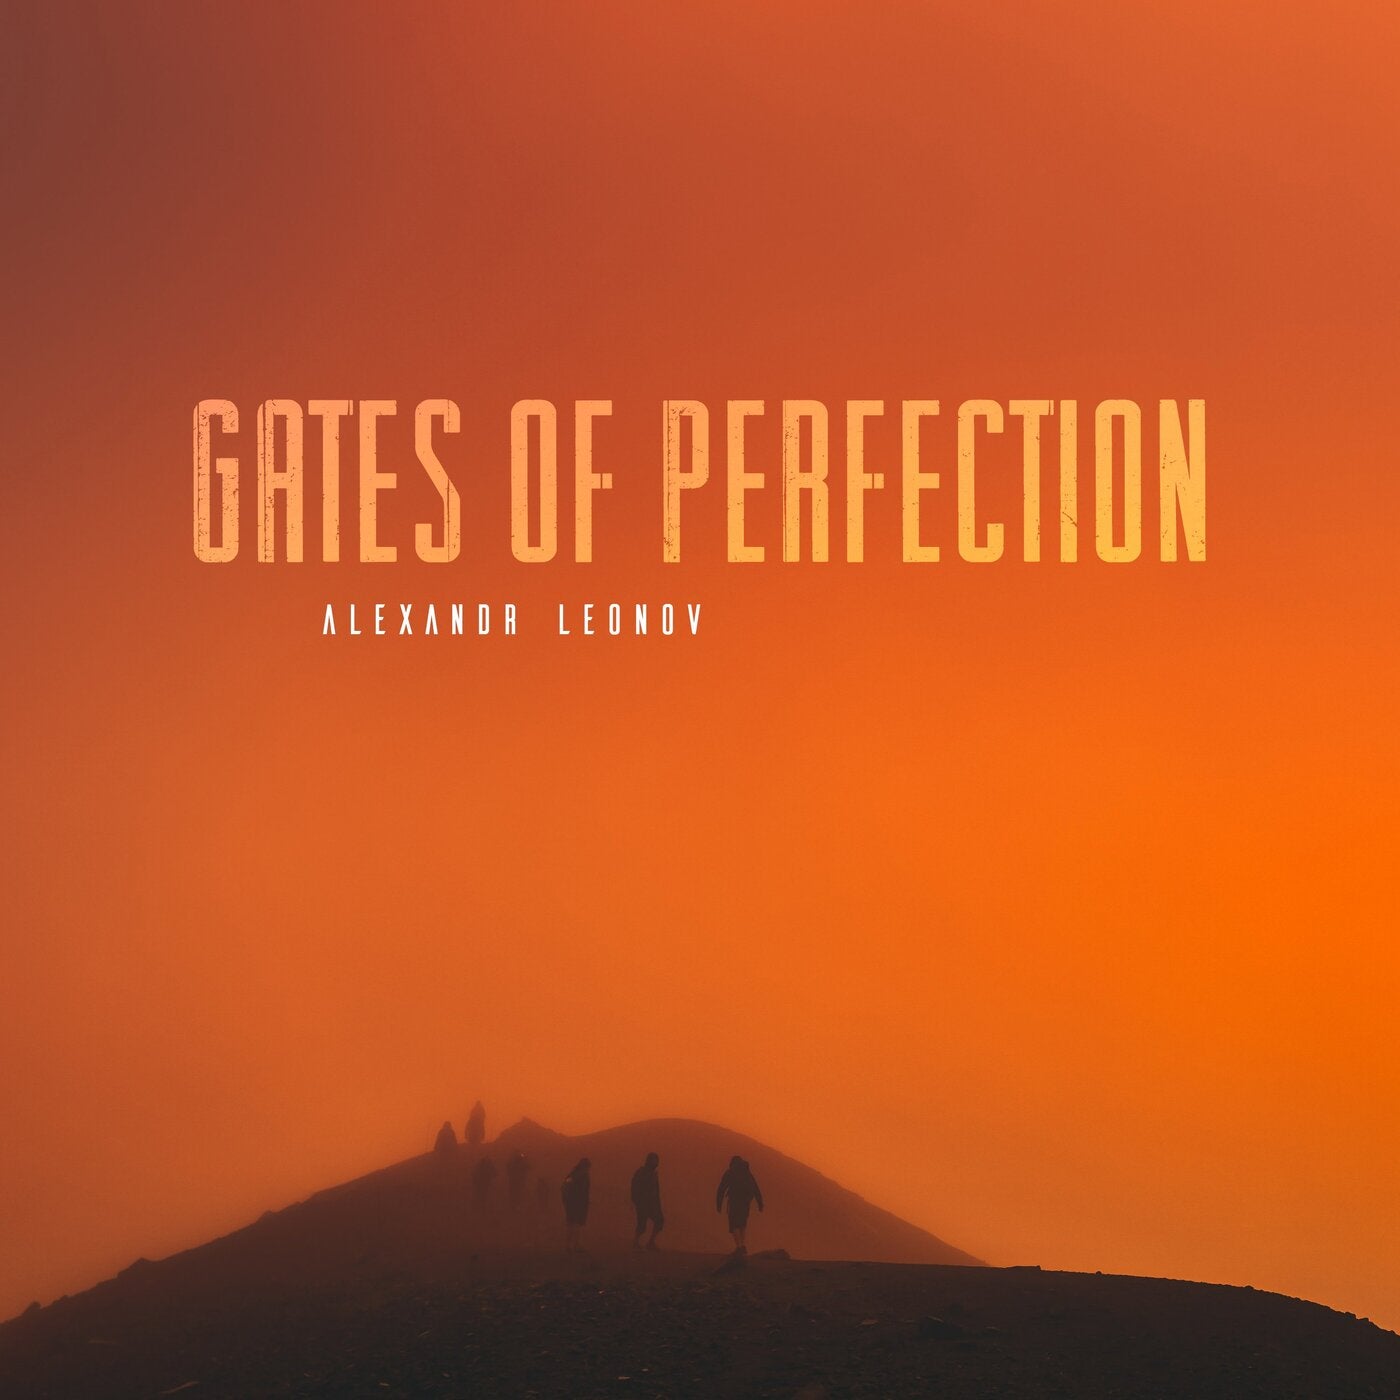 Gates of Perfection